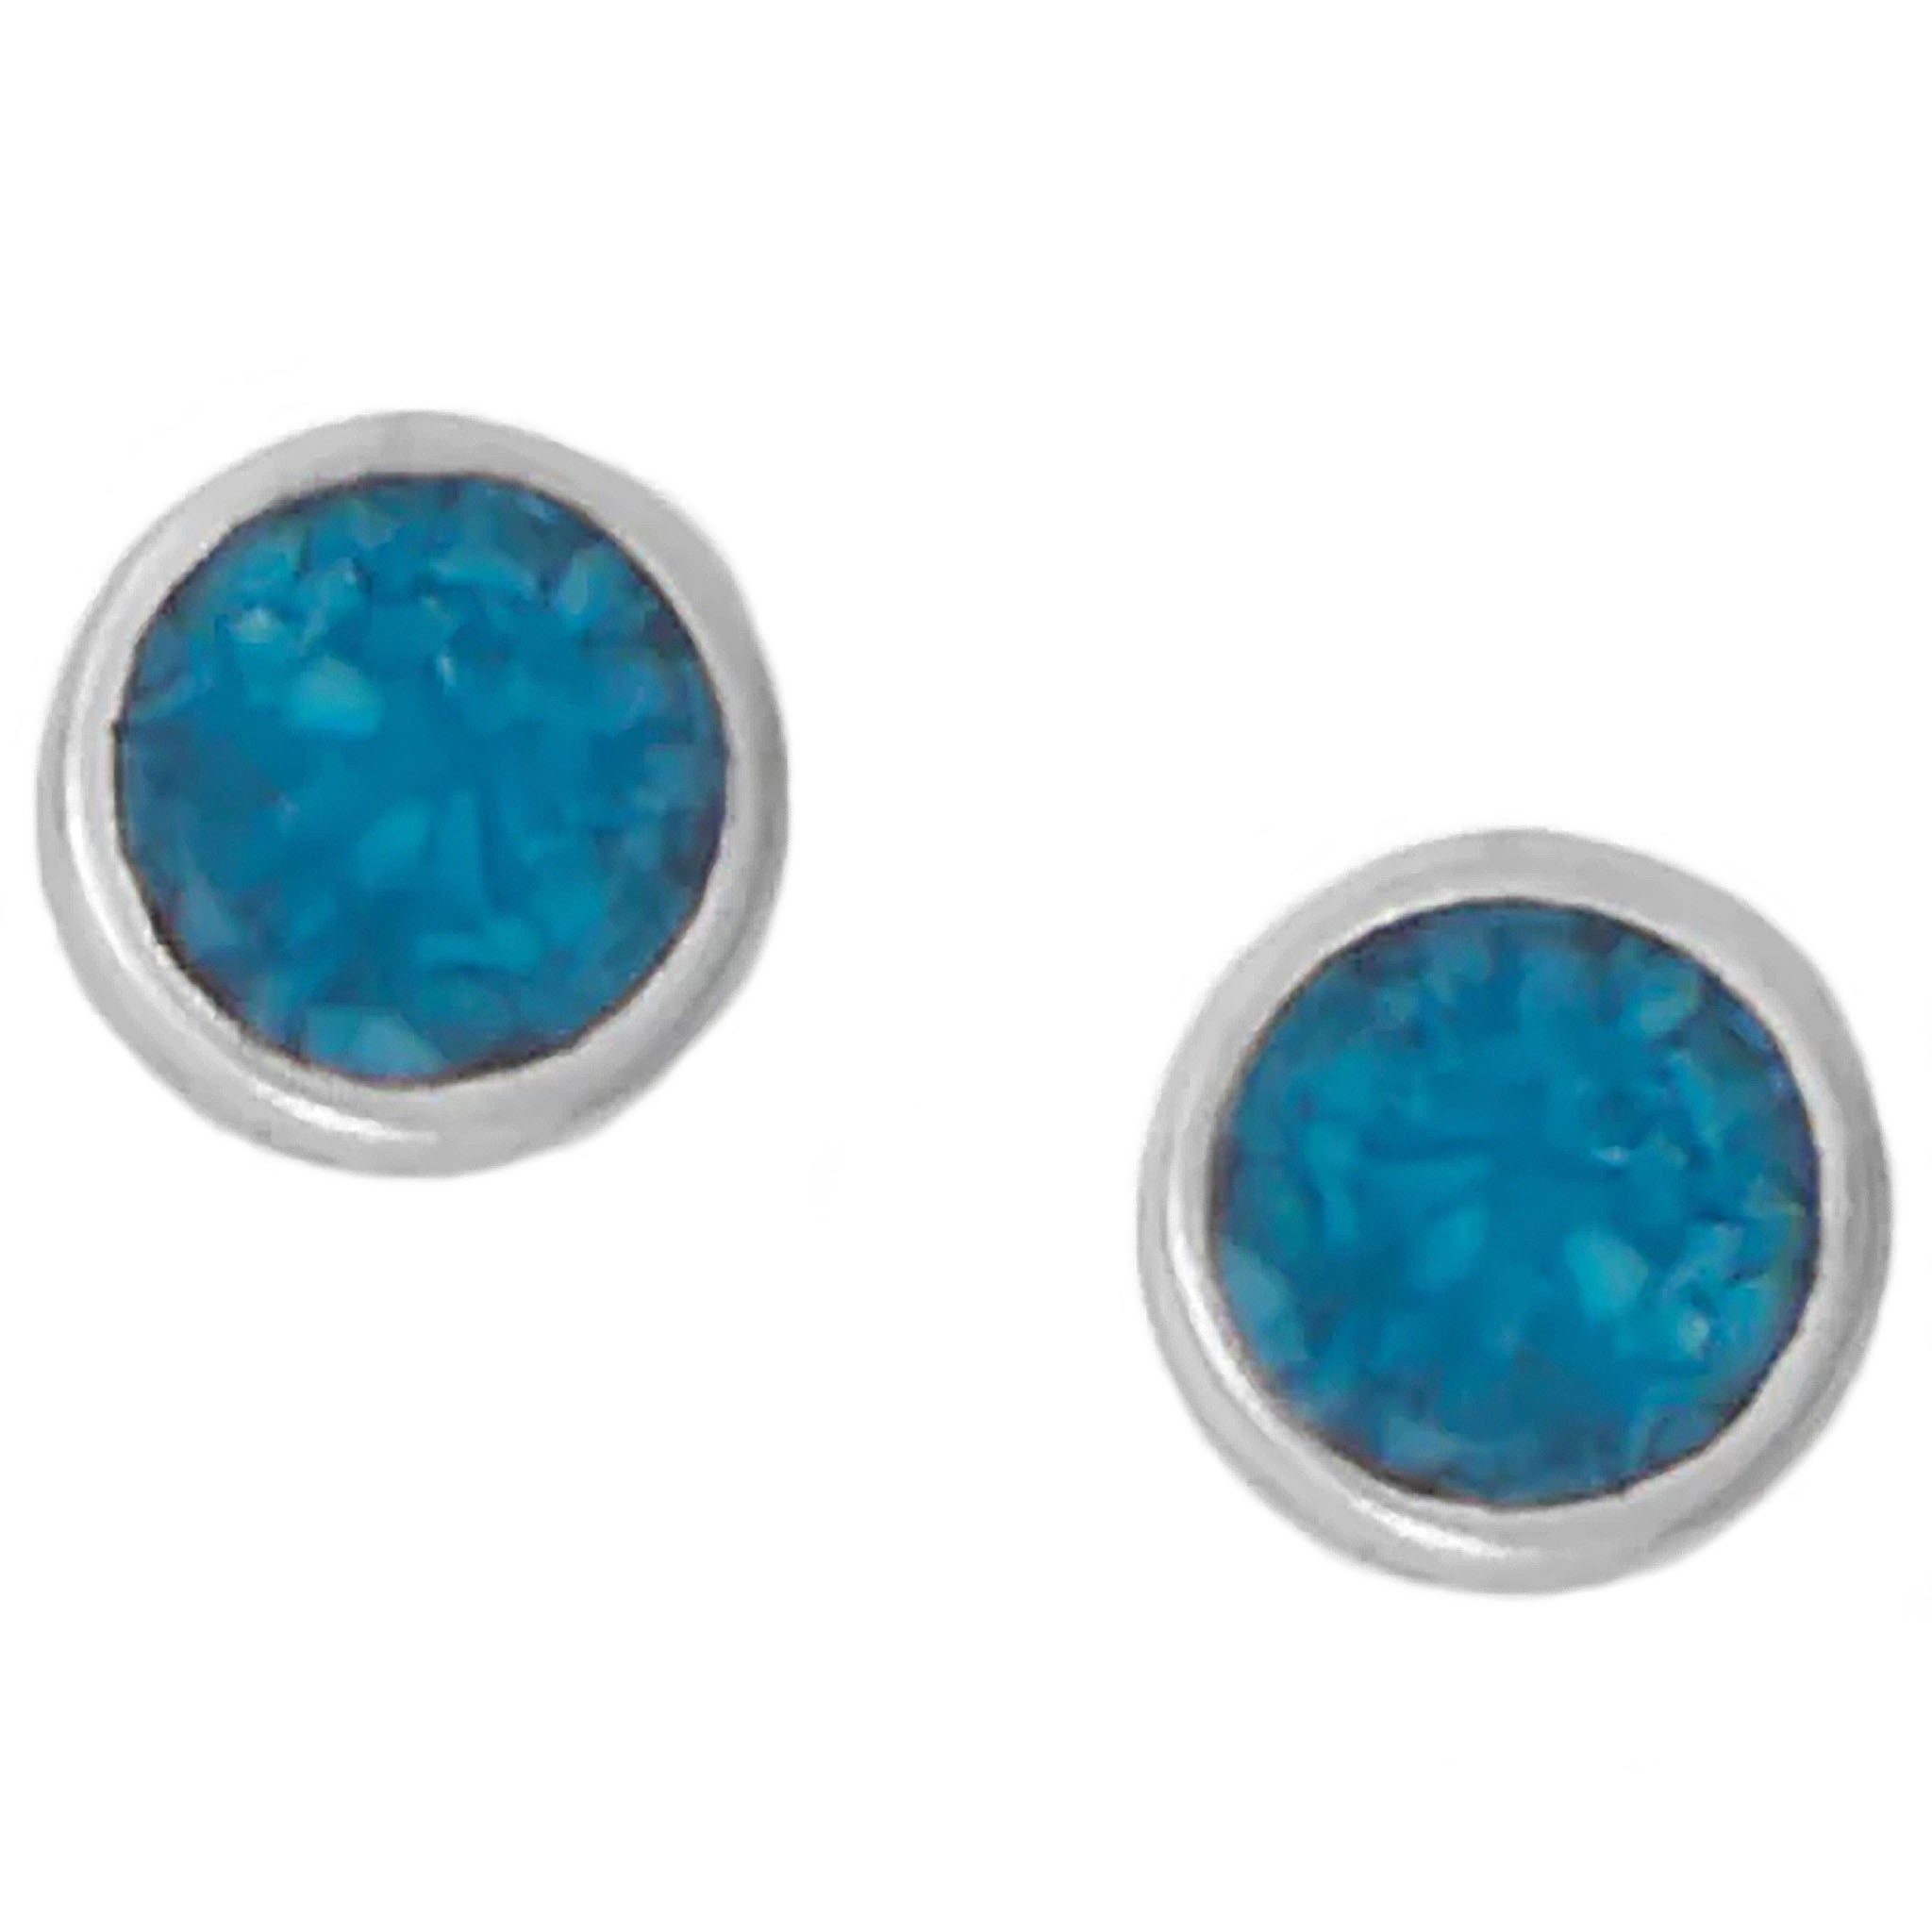 Turquoise Chip Button Stud Earrings